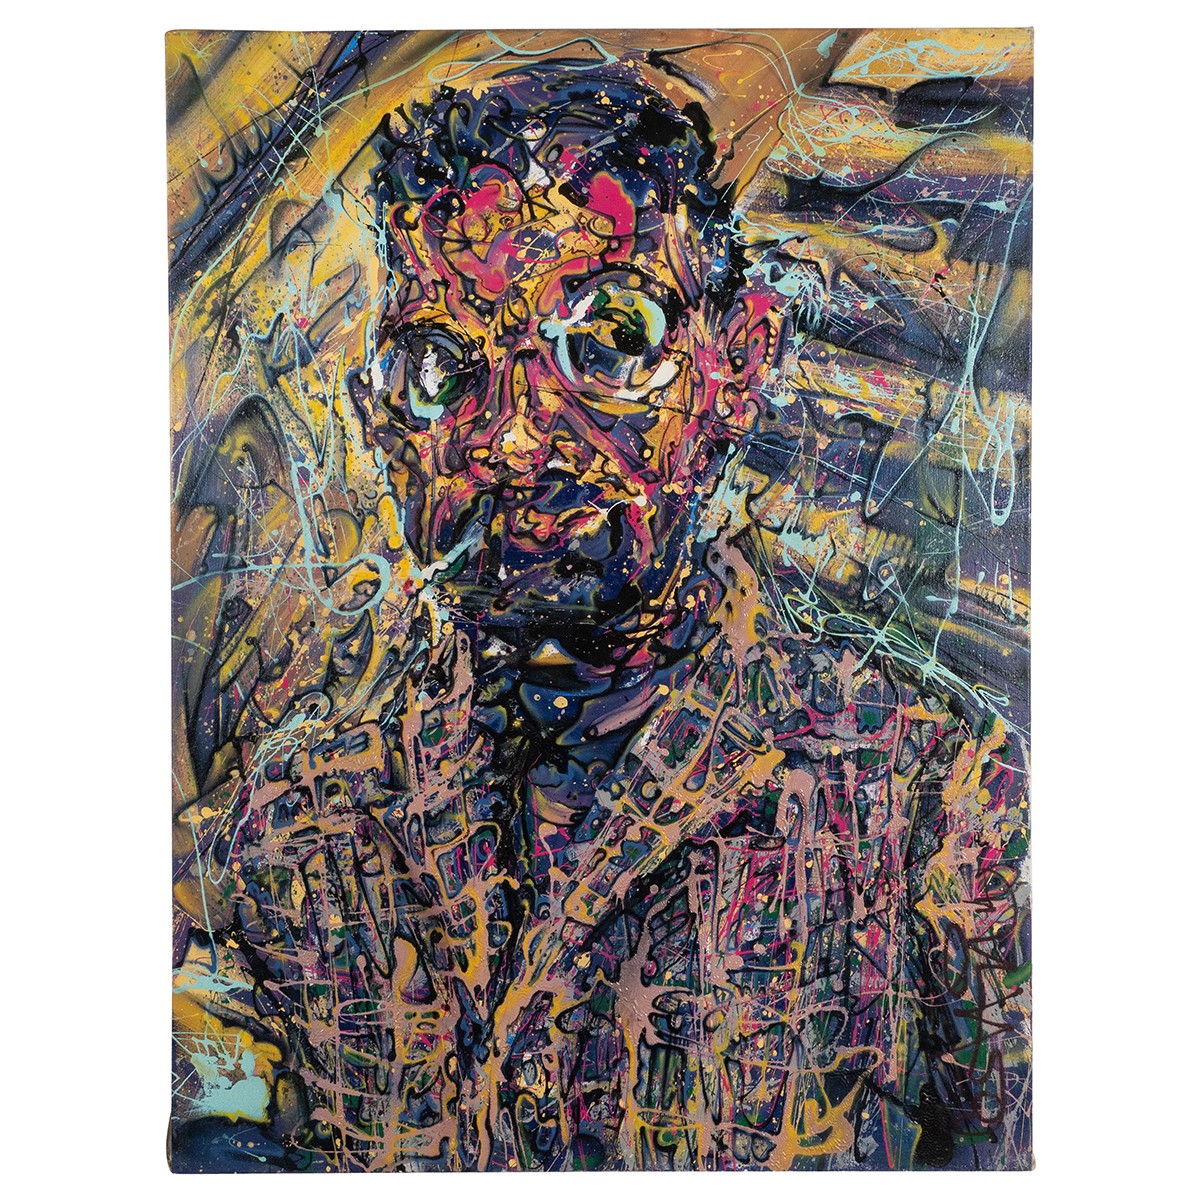 Modern Impressionistic Portrait of a Smoking Man by Costain